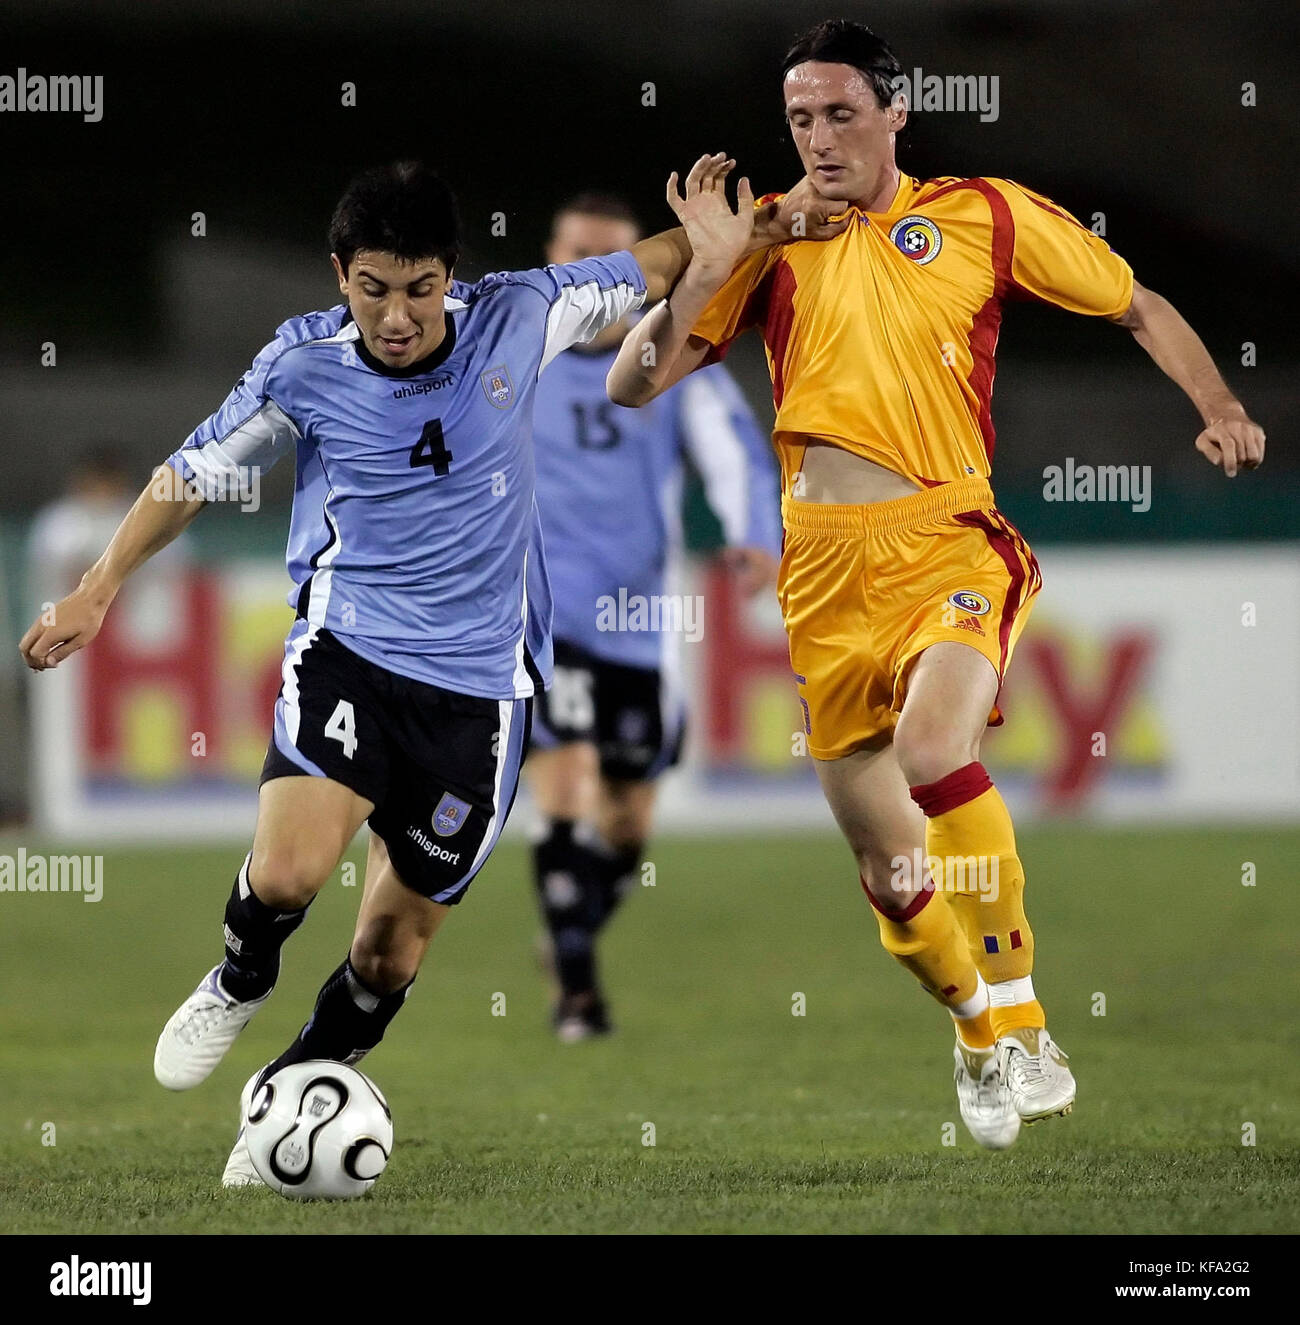 Uruguay's Jorge Fucile, left, grabs the jersey of Romania's Florin Soava during the first half of a soccer match in Los Angeles on Tuesday, May 23, 2006. Photo by Francis Specker Stock Photo